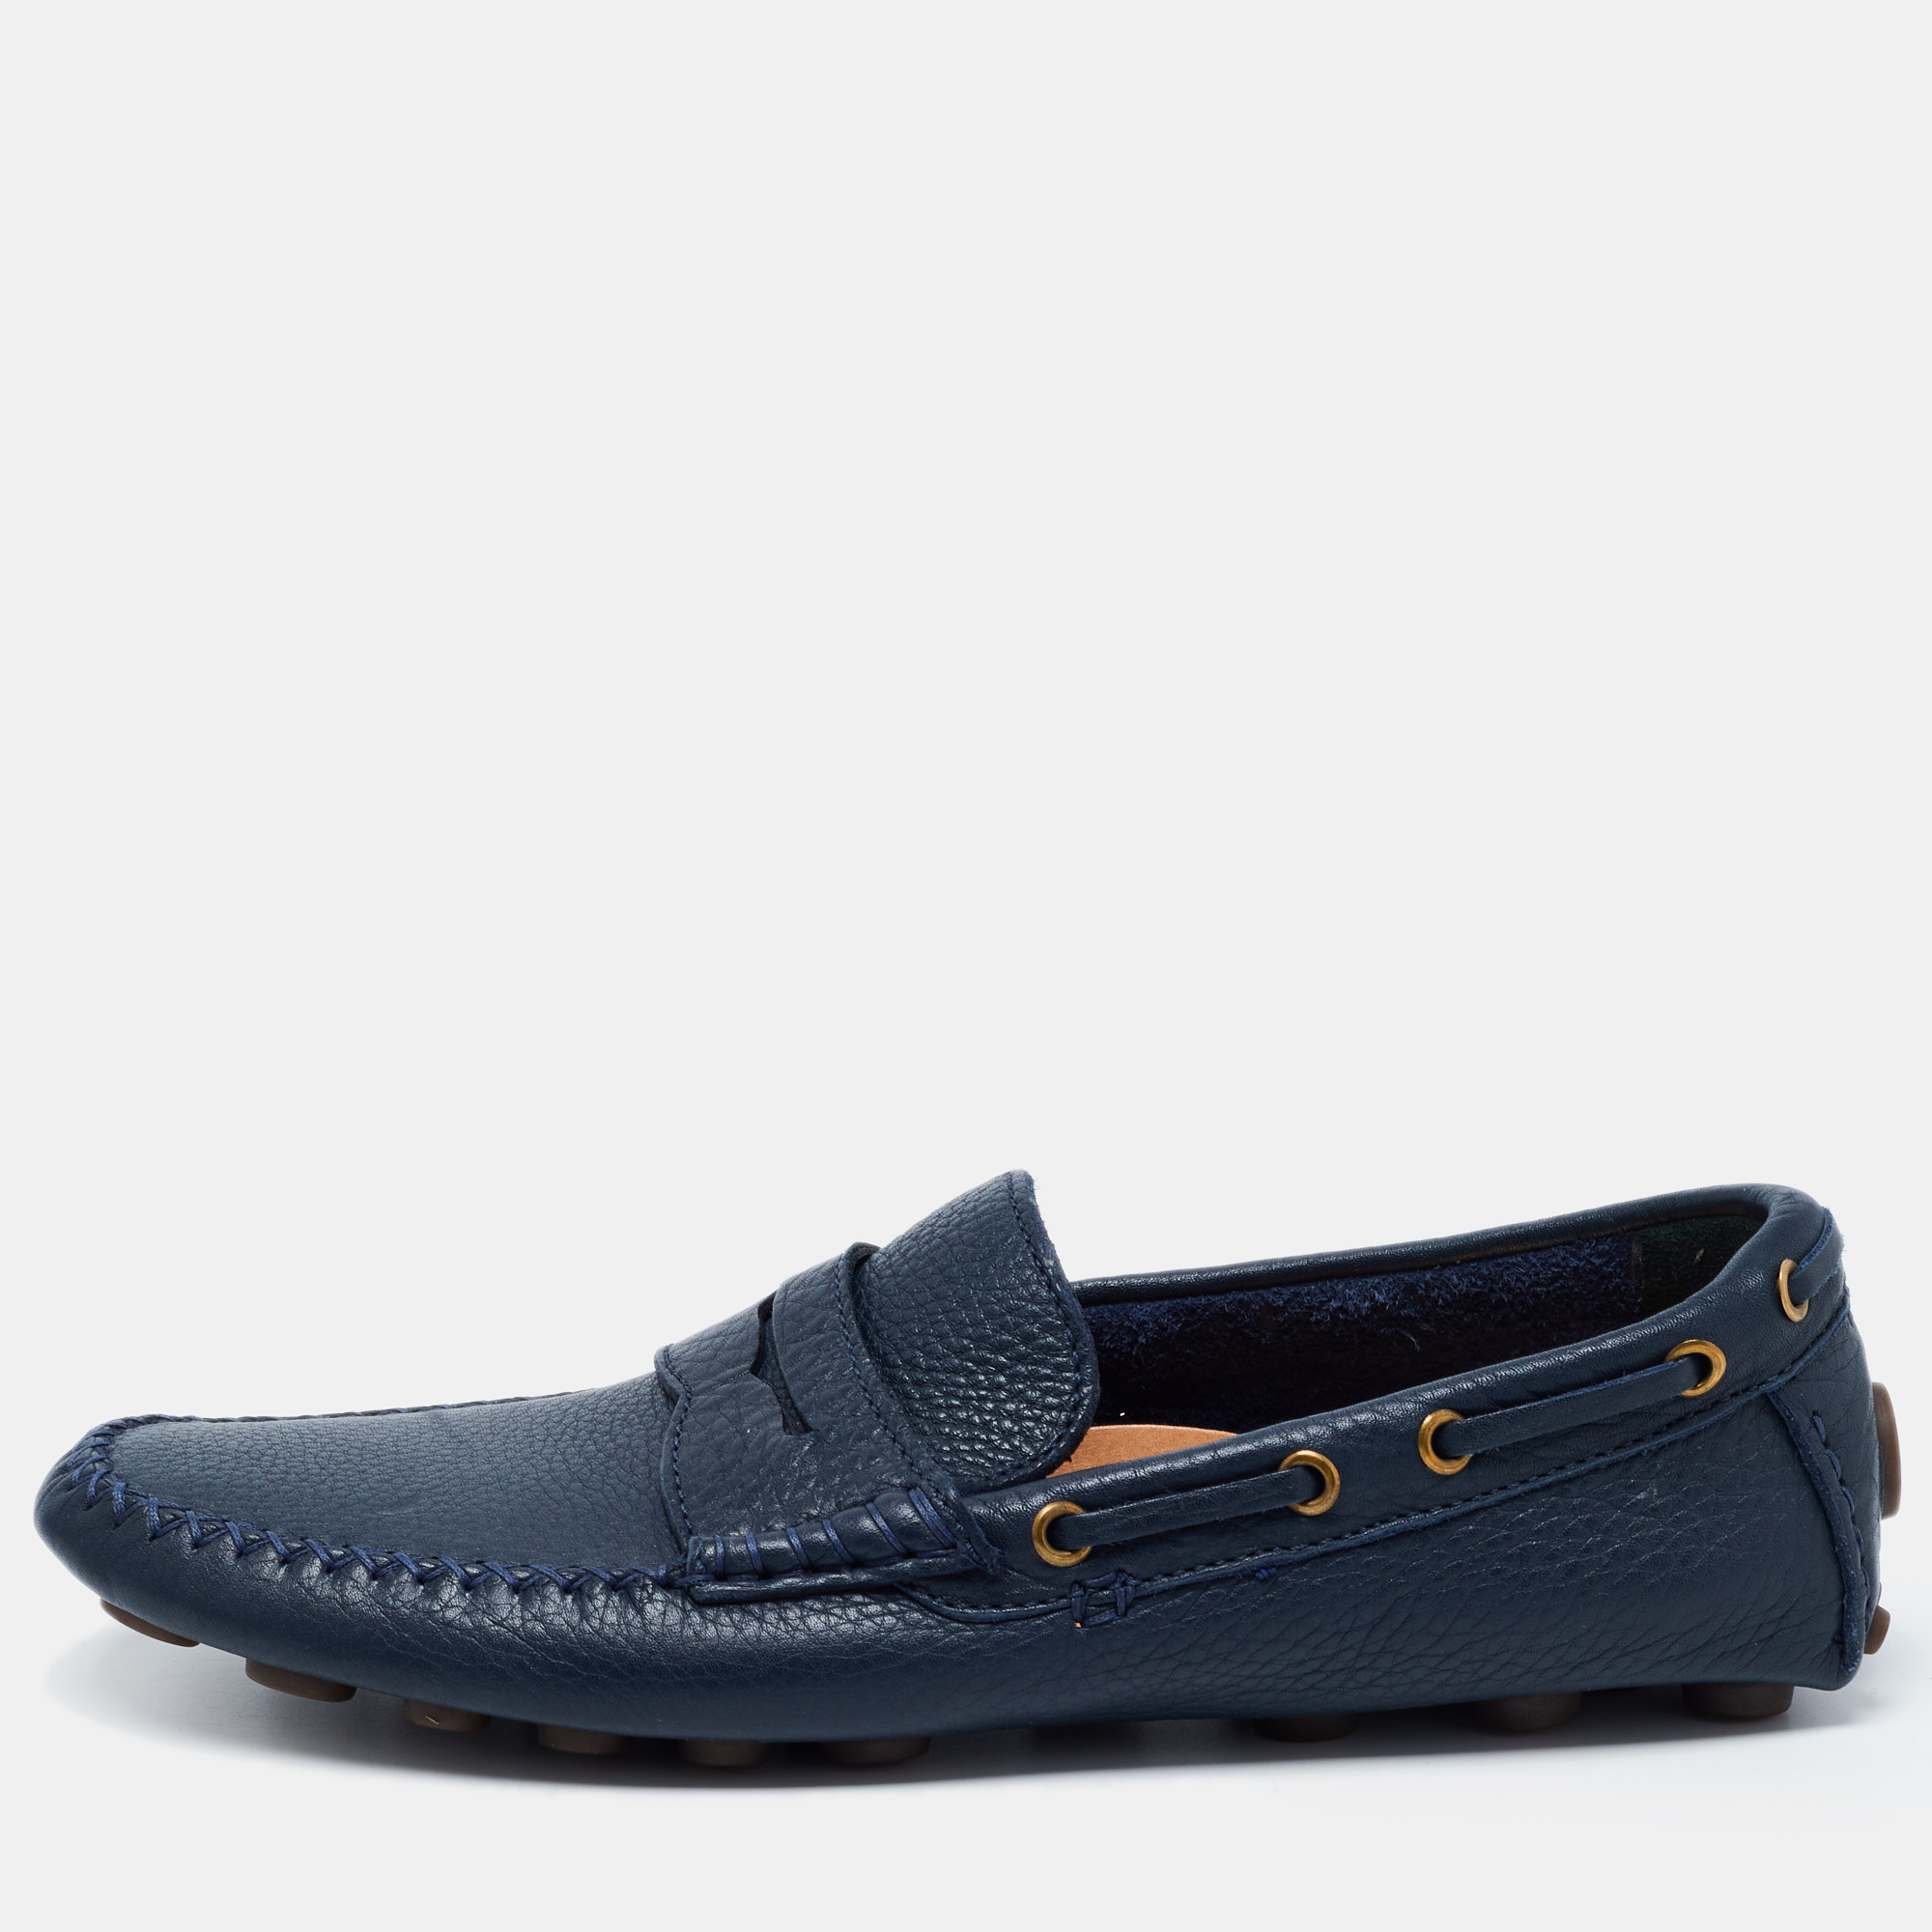 Pre-owned Saint Laurent Navy Blue Leather Penny Loafers Size 39